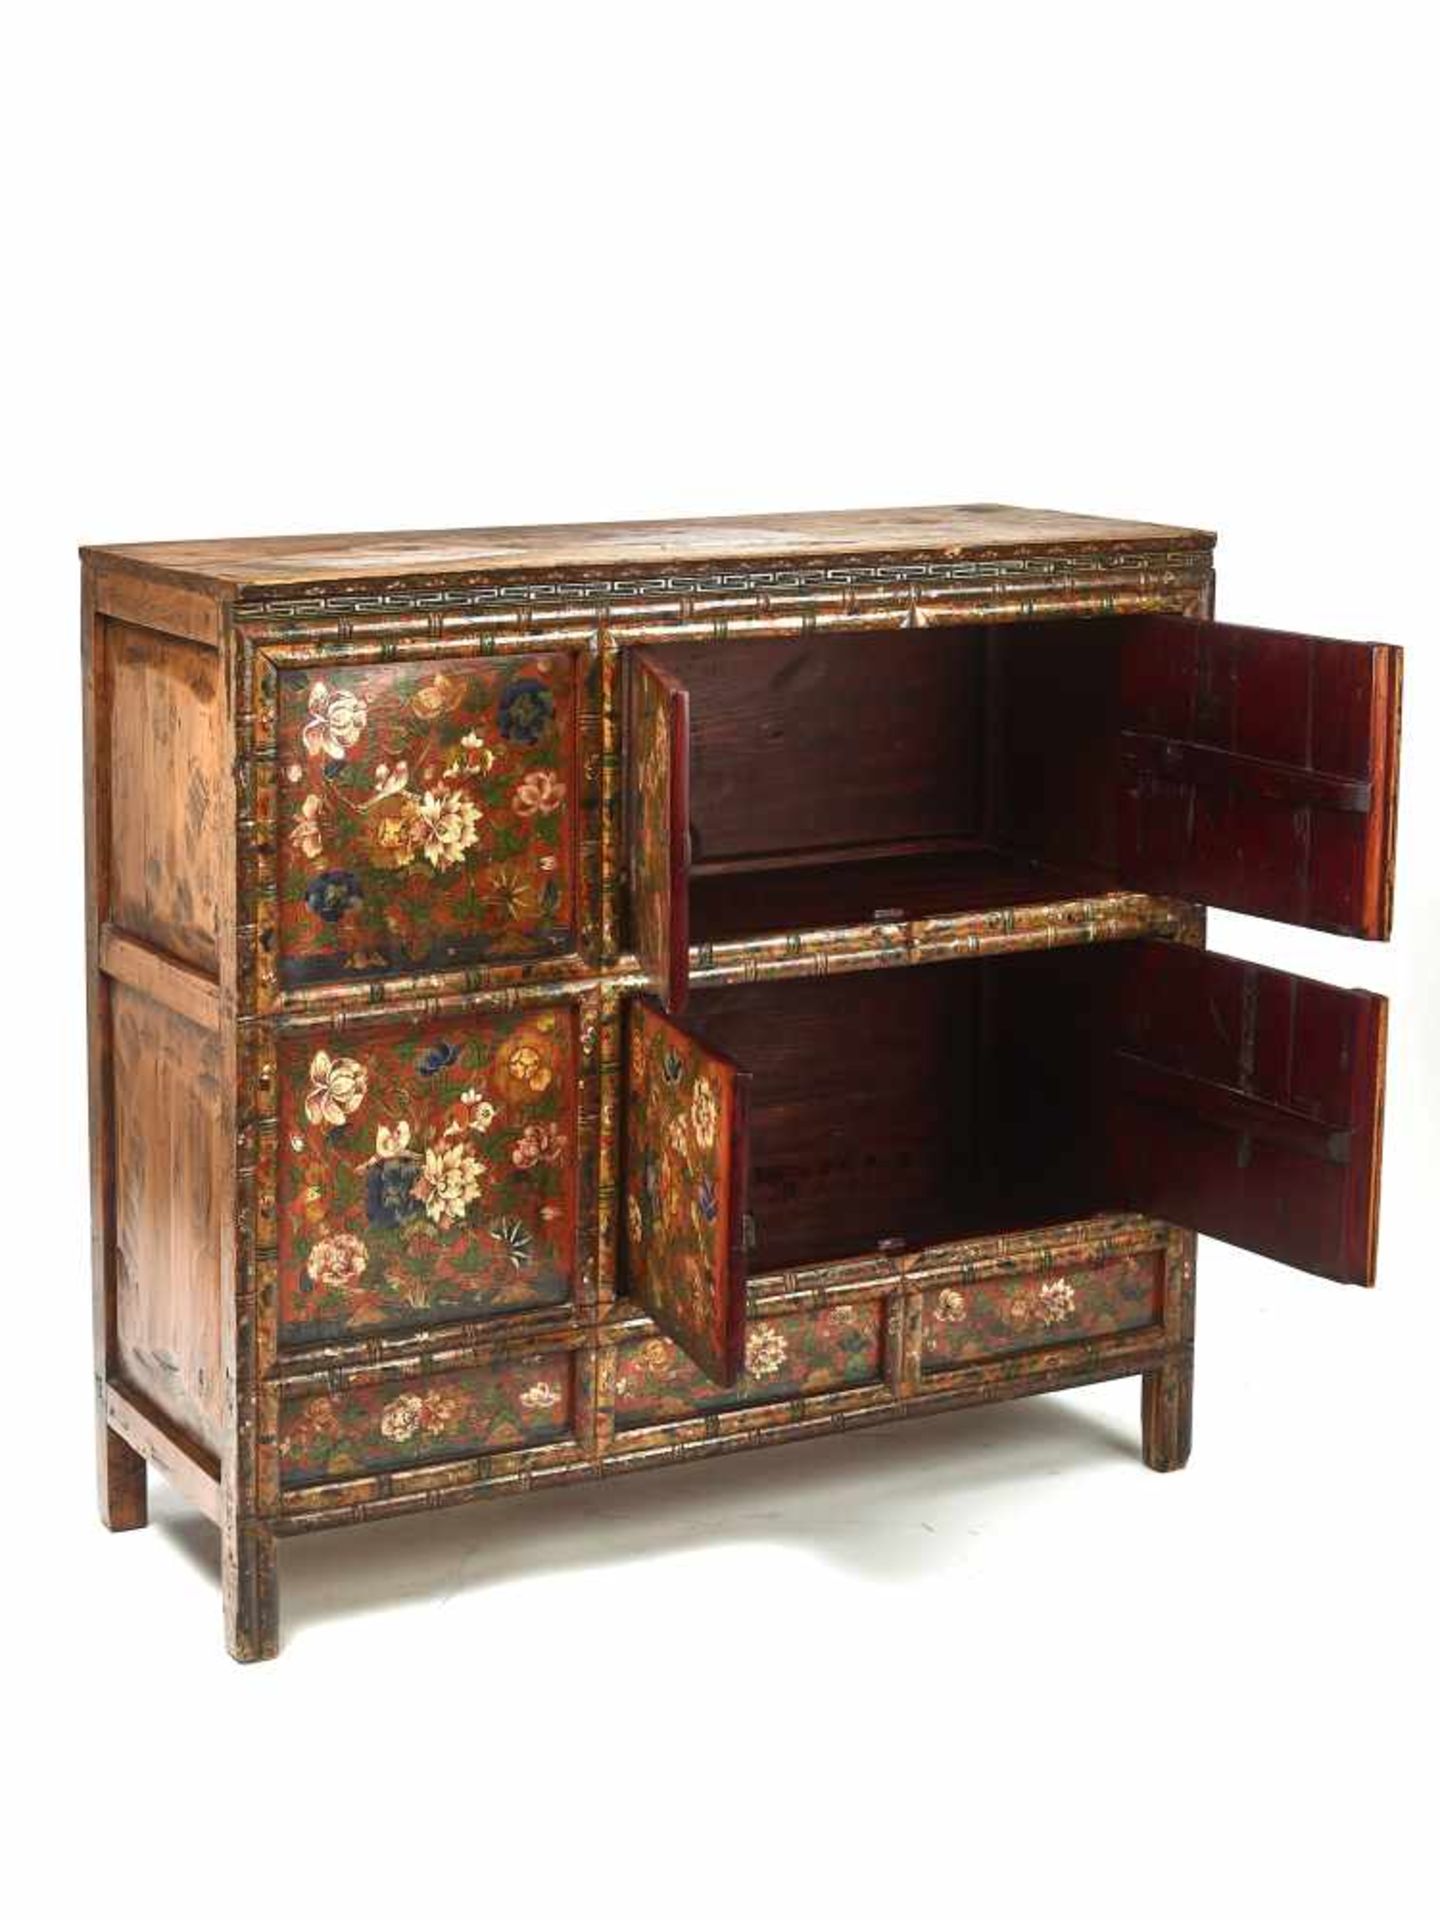 A RARE AND LARGE TIBETAN LACQUERED HARDWOOD CABINET, 19TH CENTURYNicely painted original lacquer - Bild 3 aus 5